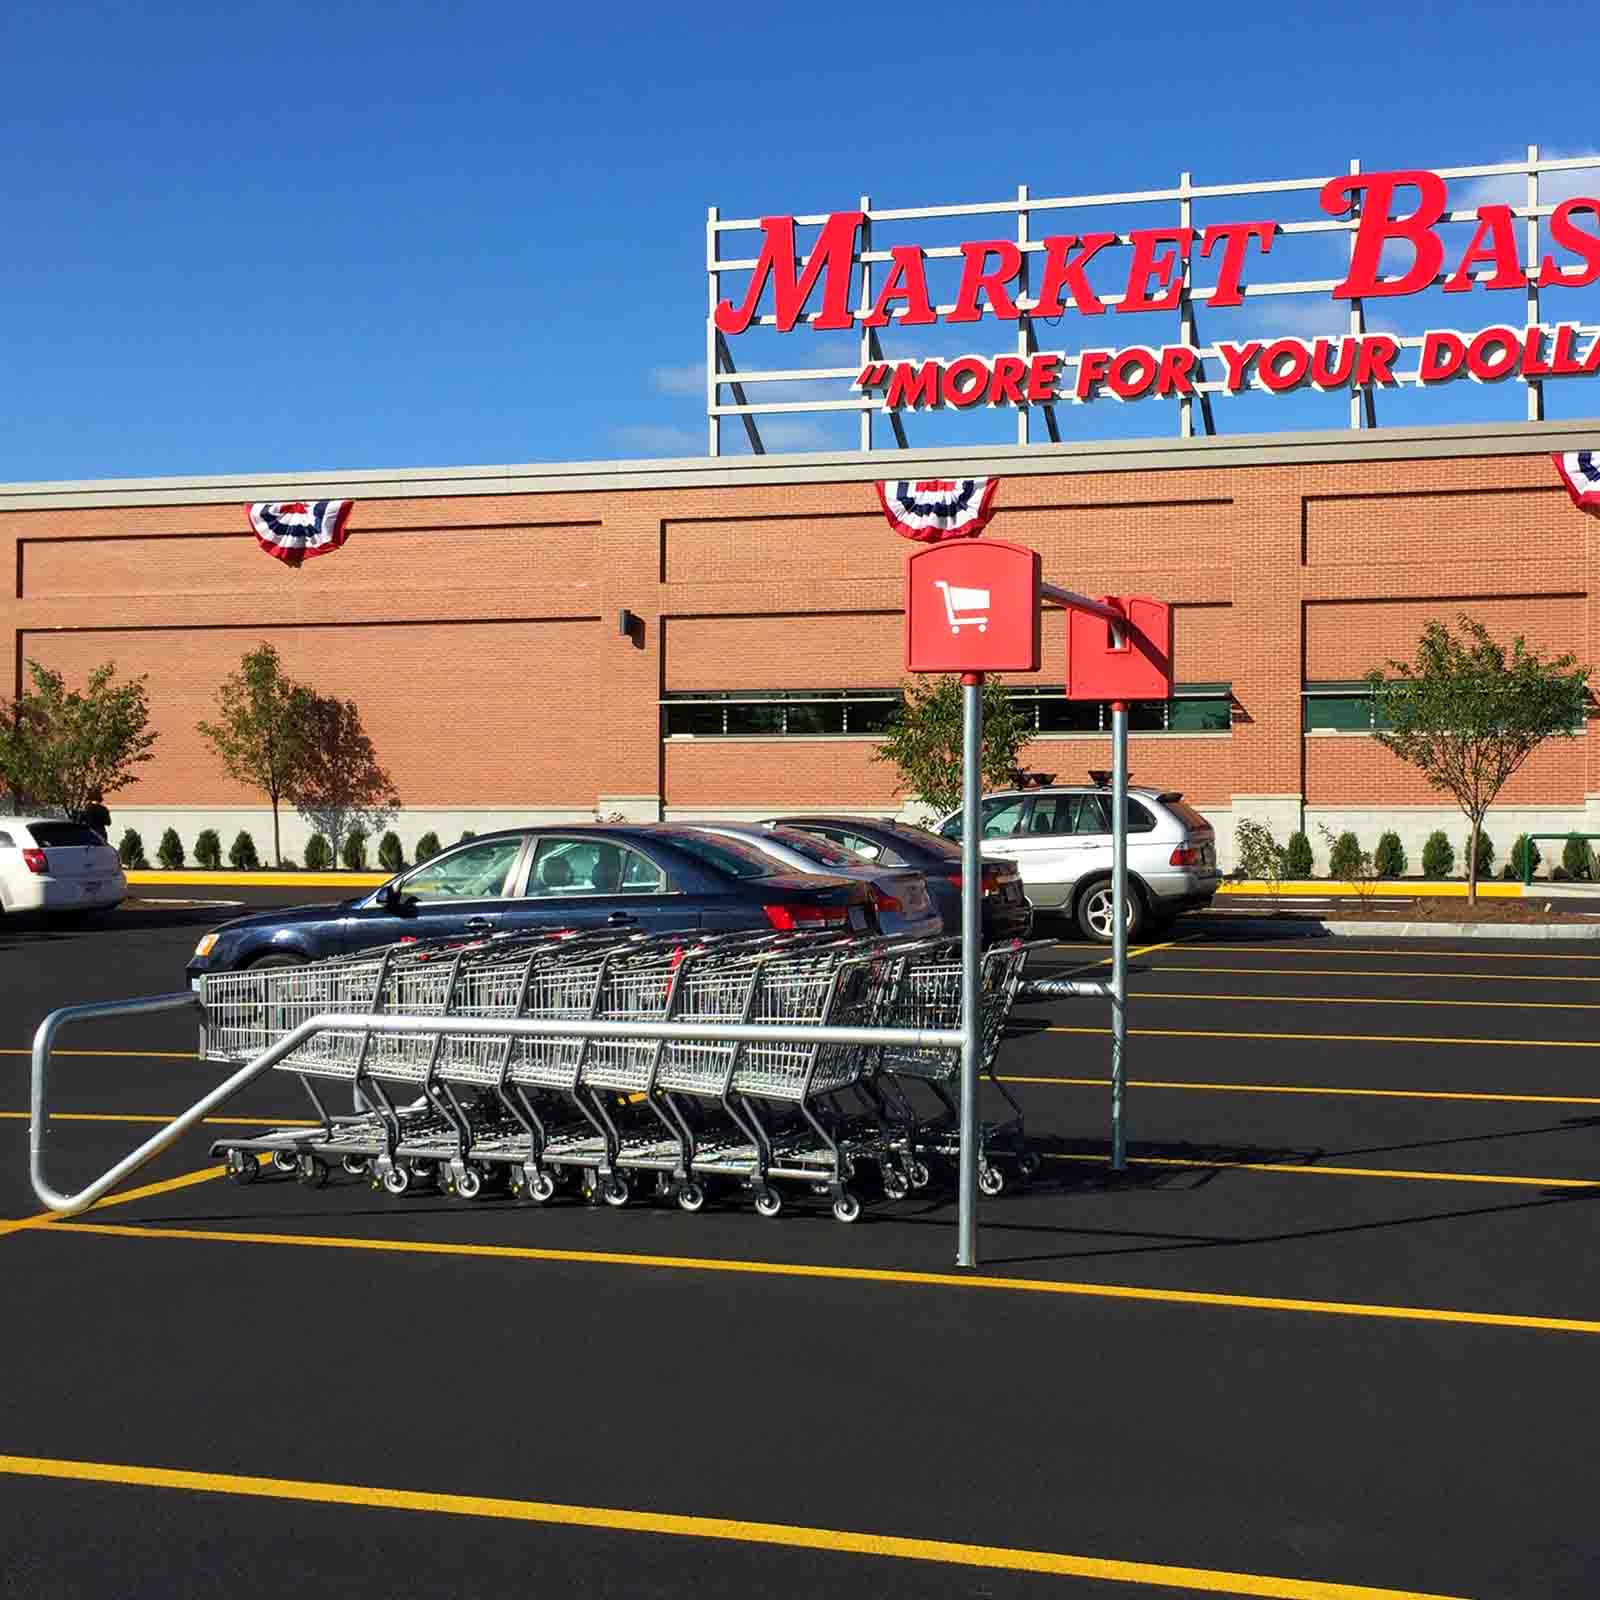 McCue Cart Corral In Parking Lot